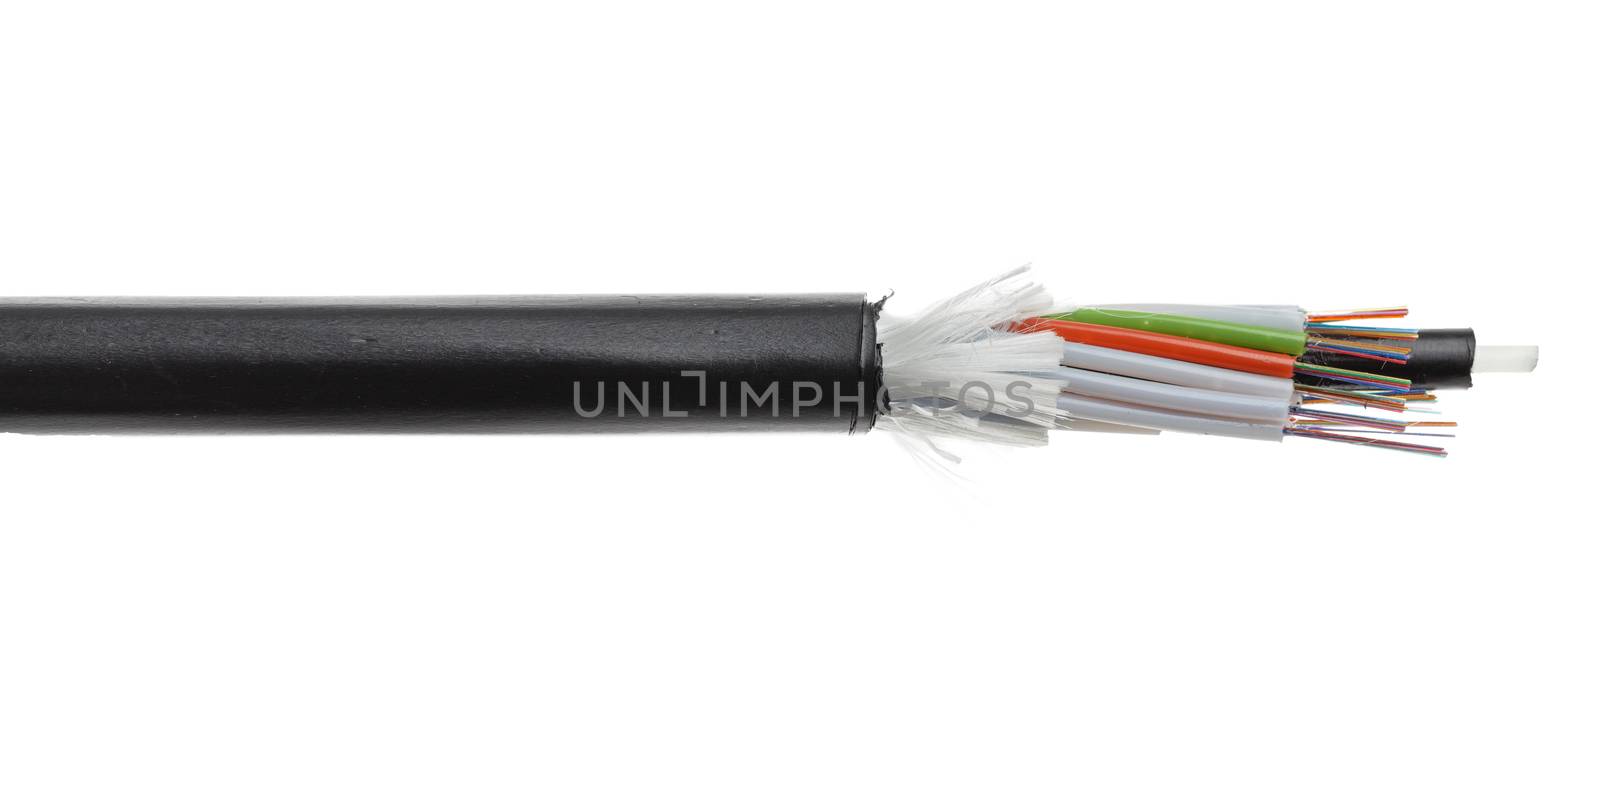 Fiber optical cable detail isolated on white background. Loose tubes with optical fibres and central strenght member including waterblocking glass yarn and ripcord, multimode or single mode